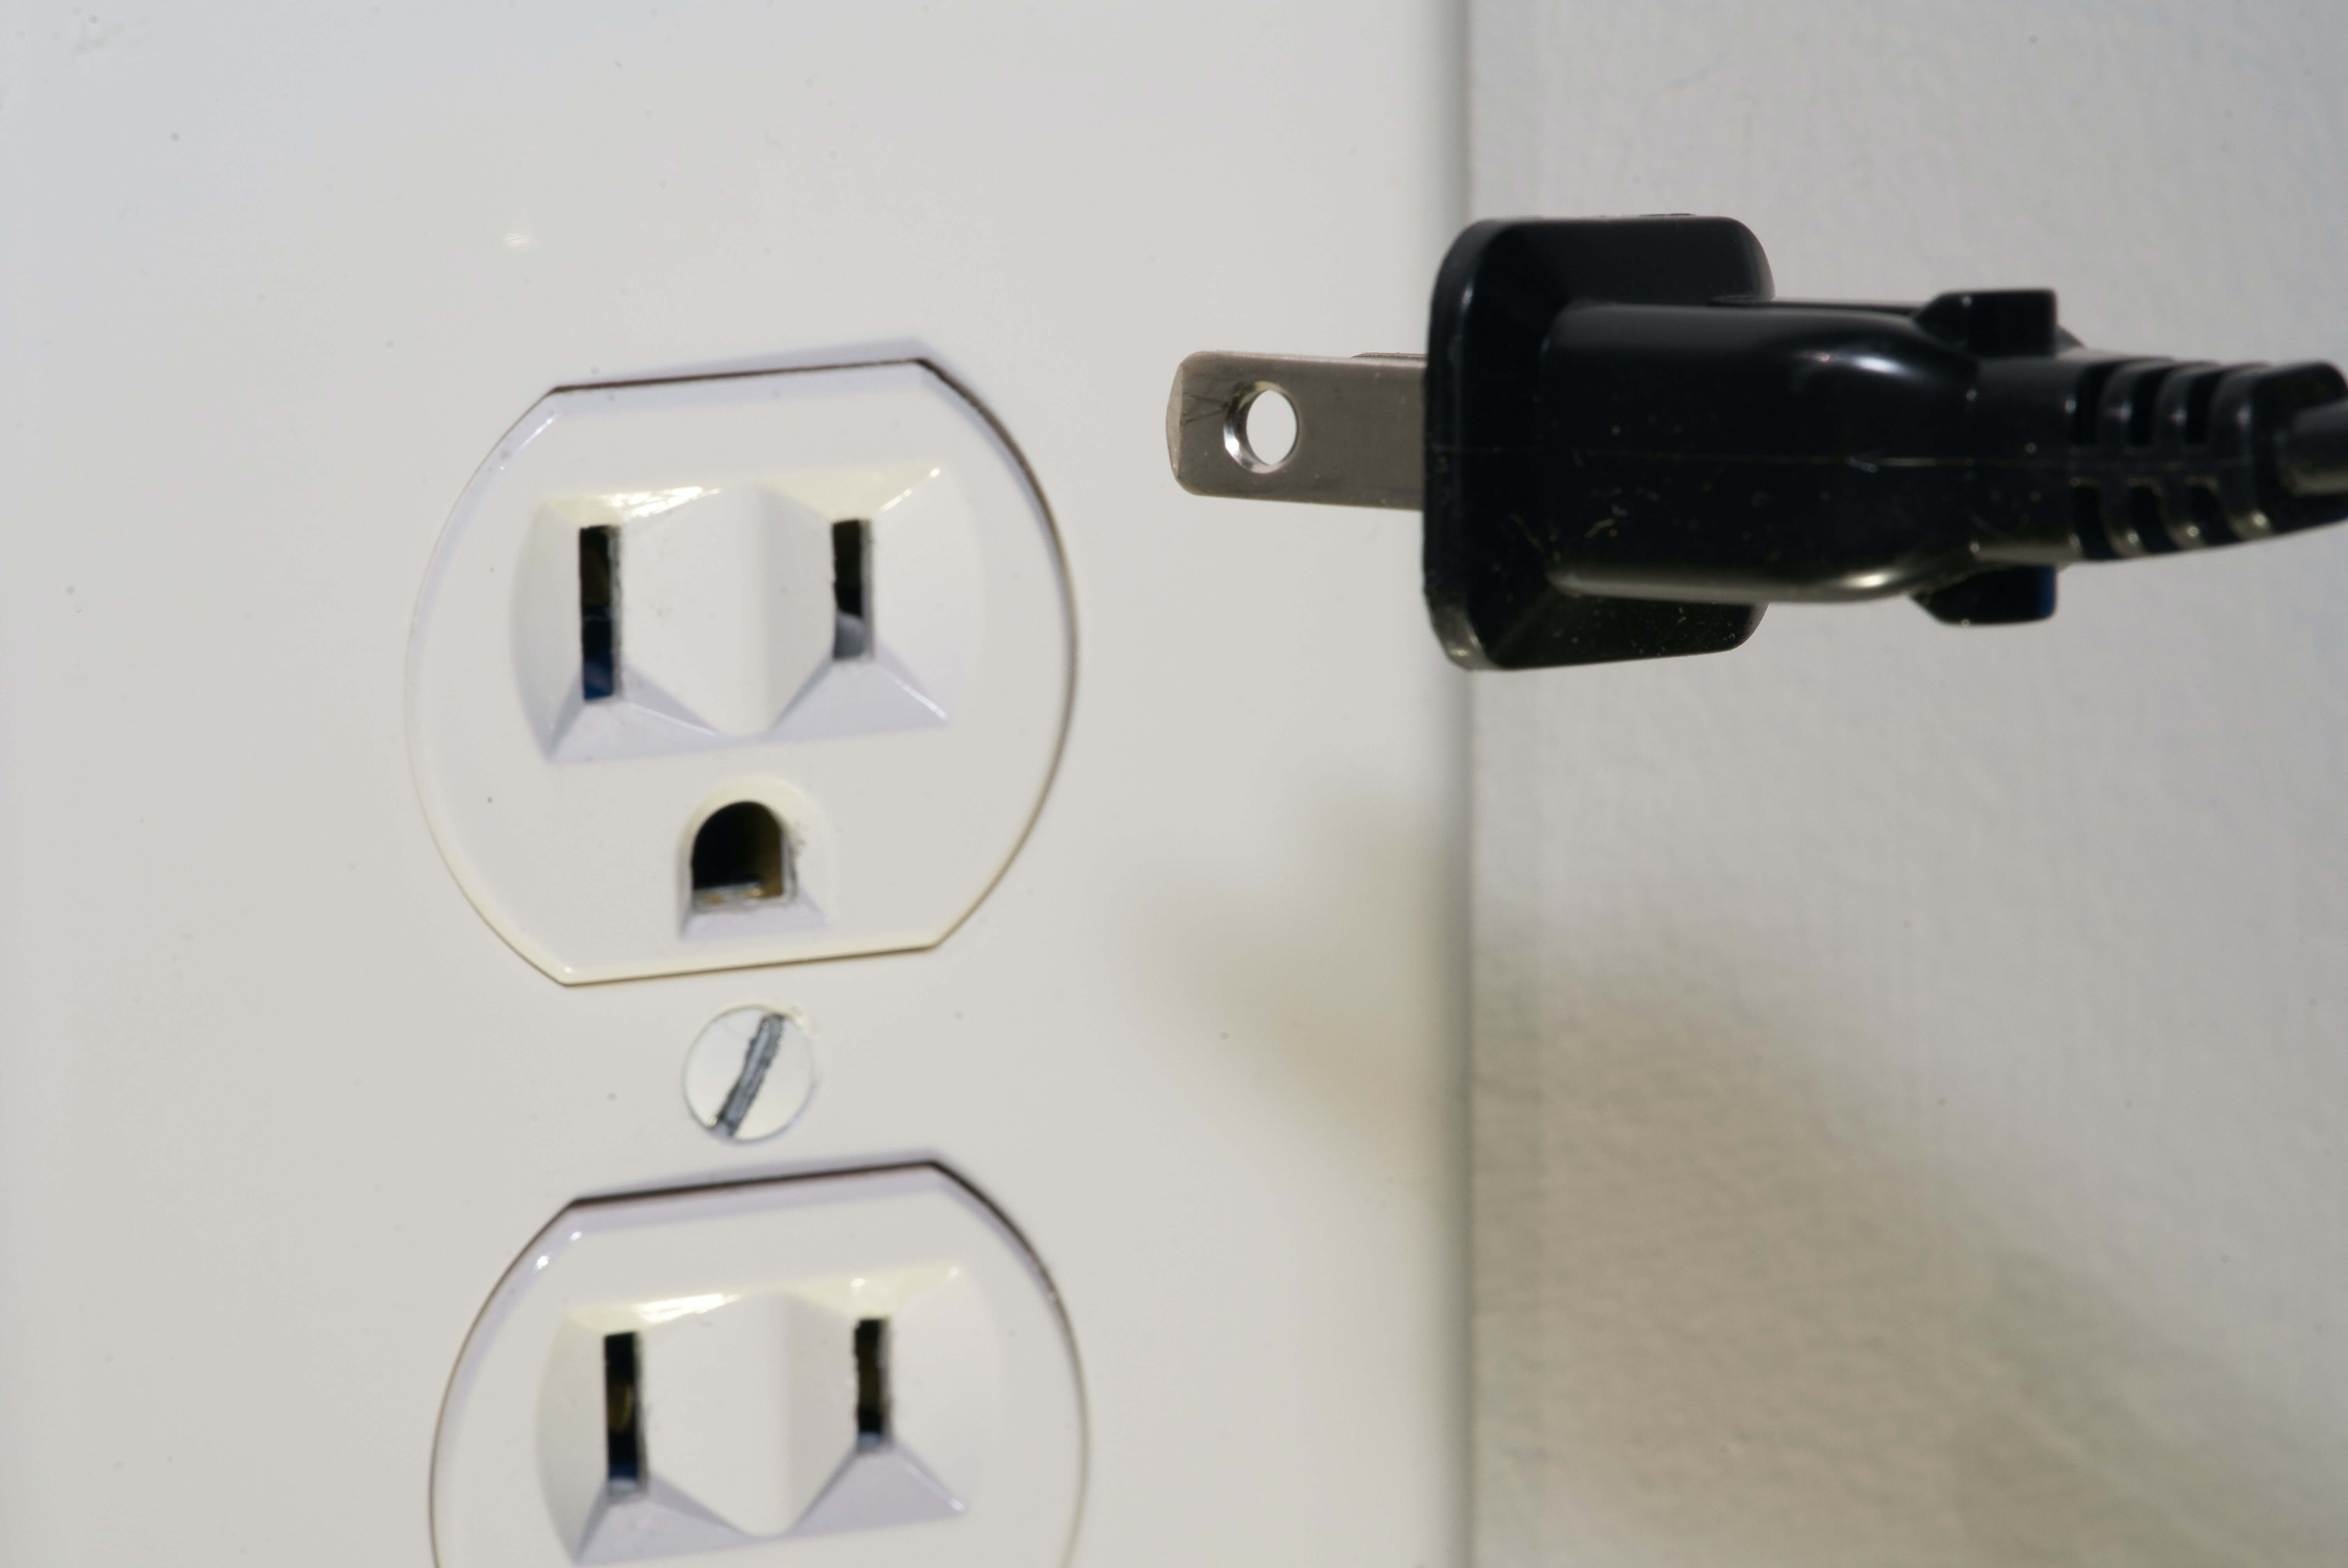 unplug chords from your home while youre away